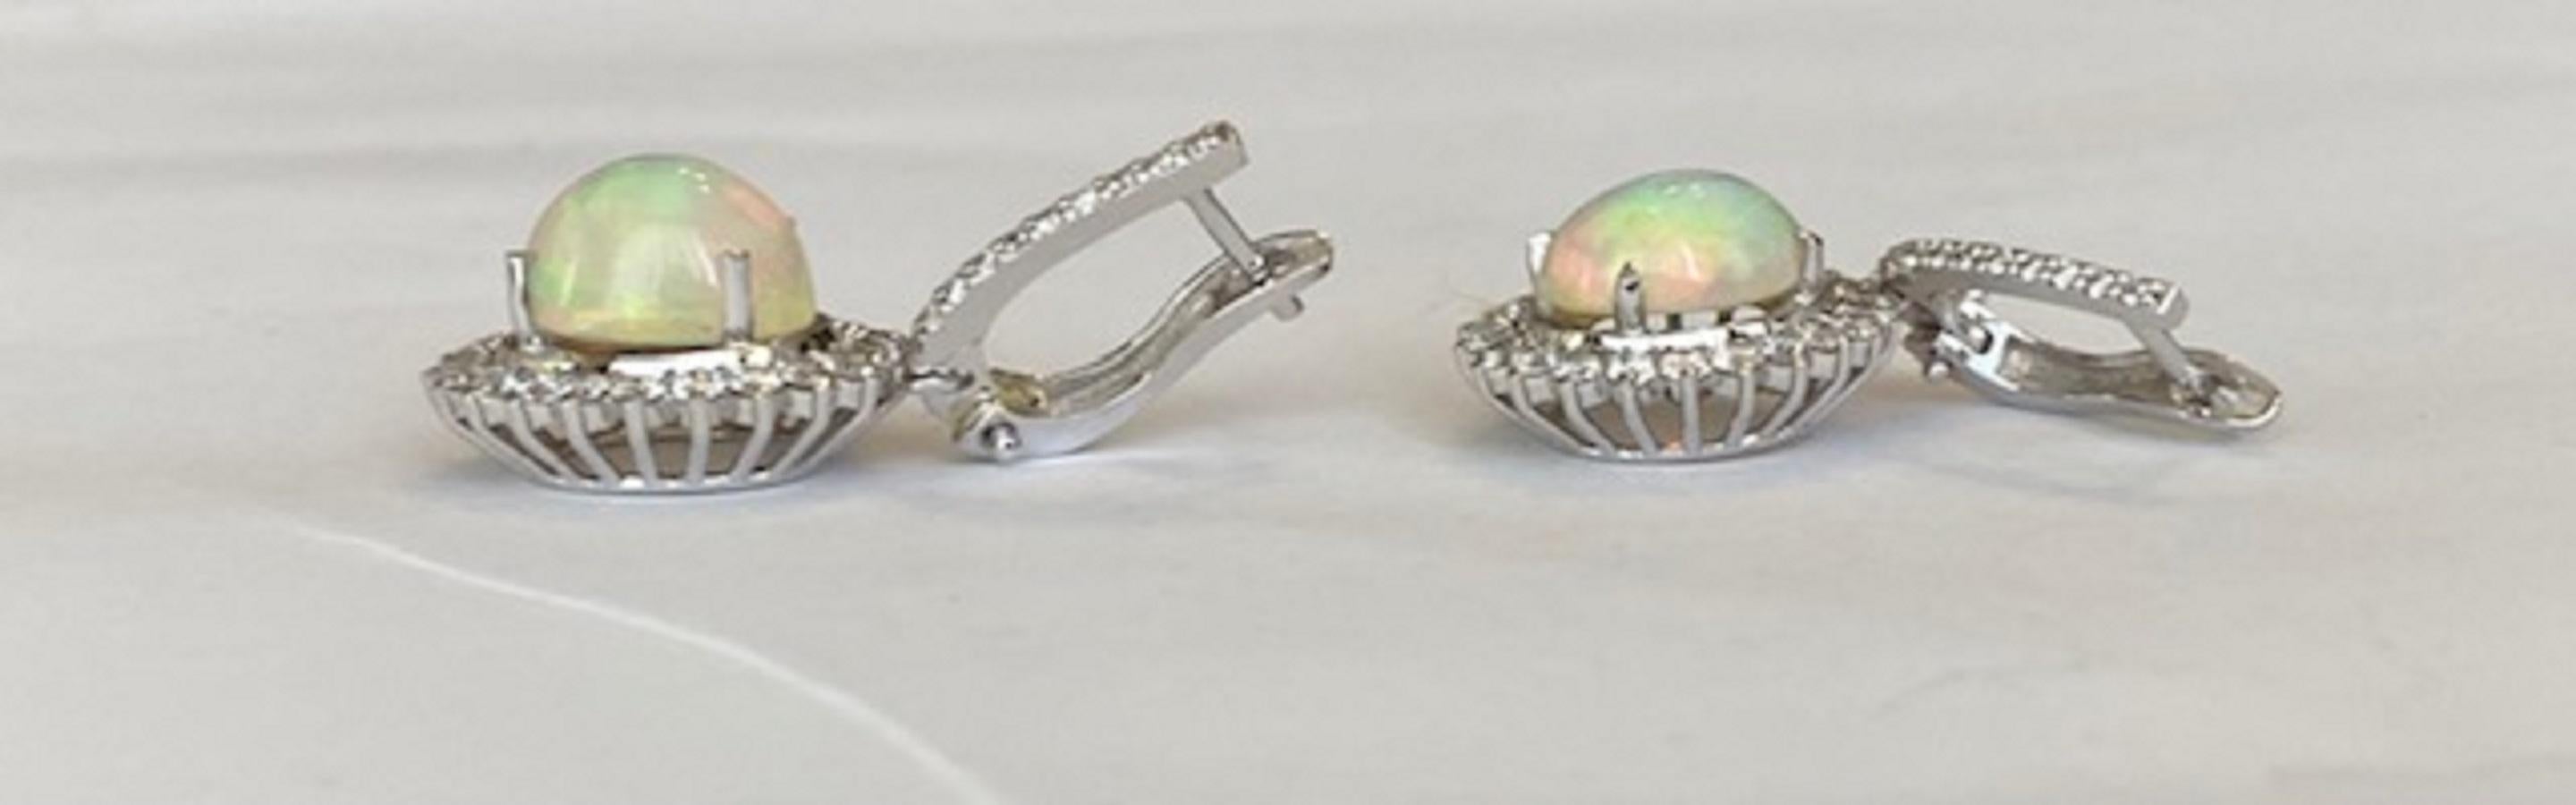 18 Kt. White Gold Earrings with 4.15 Ct Opals and Diamonds 5